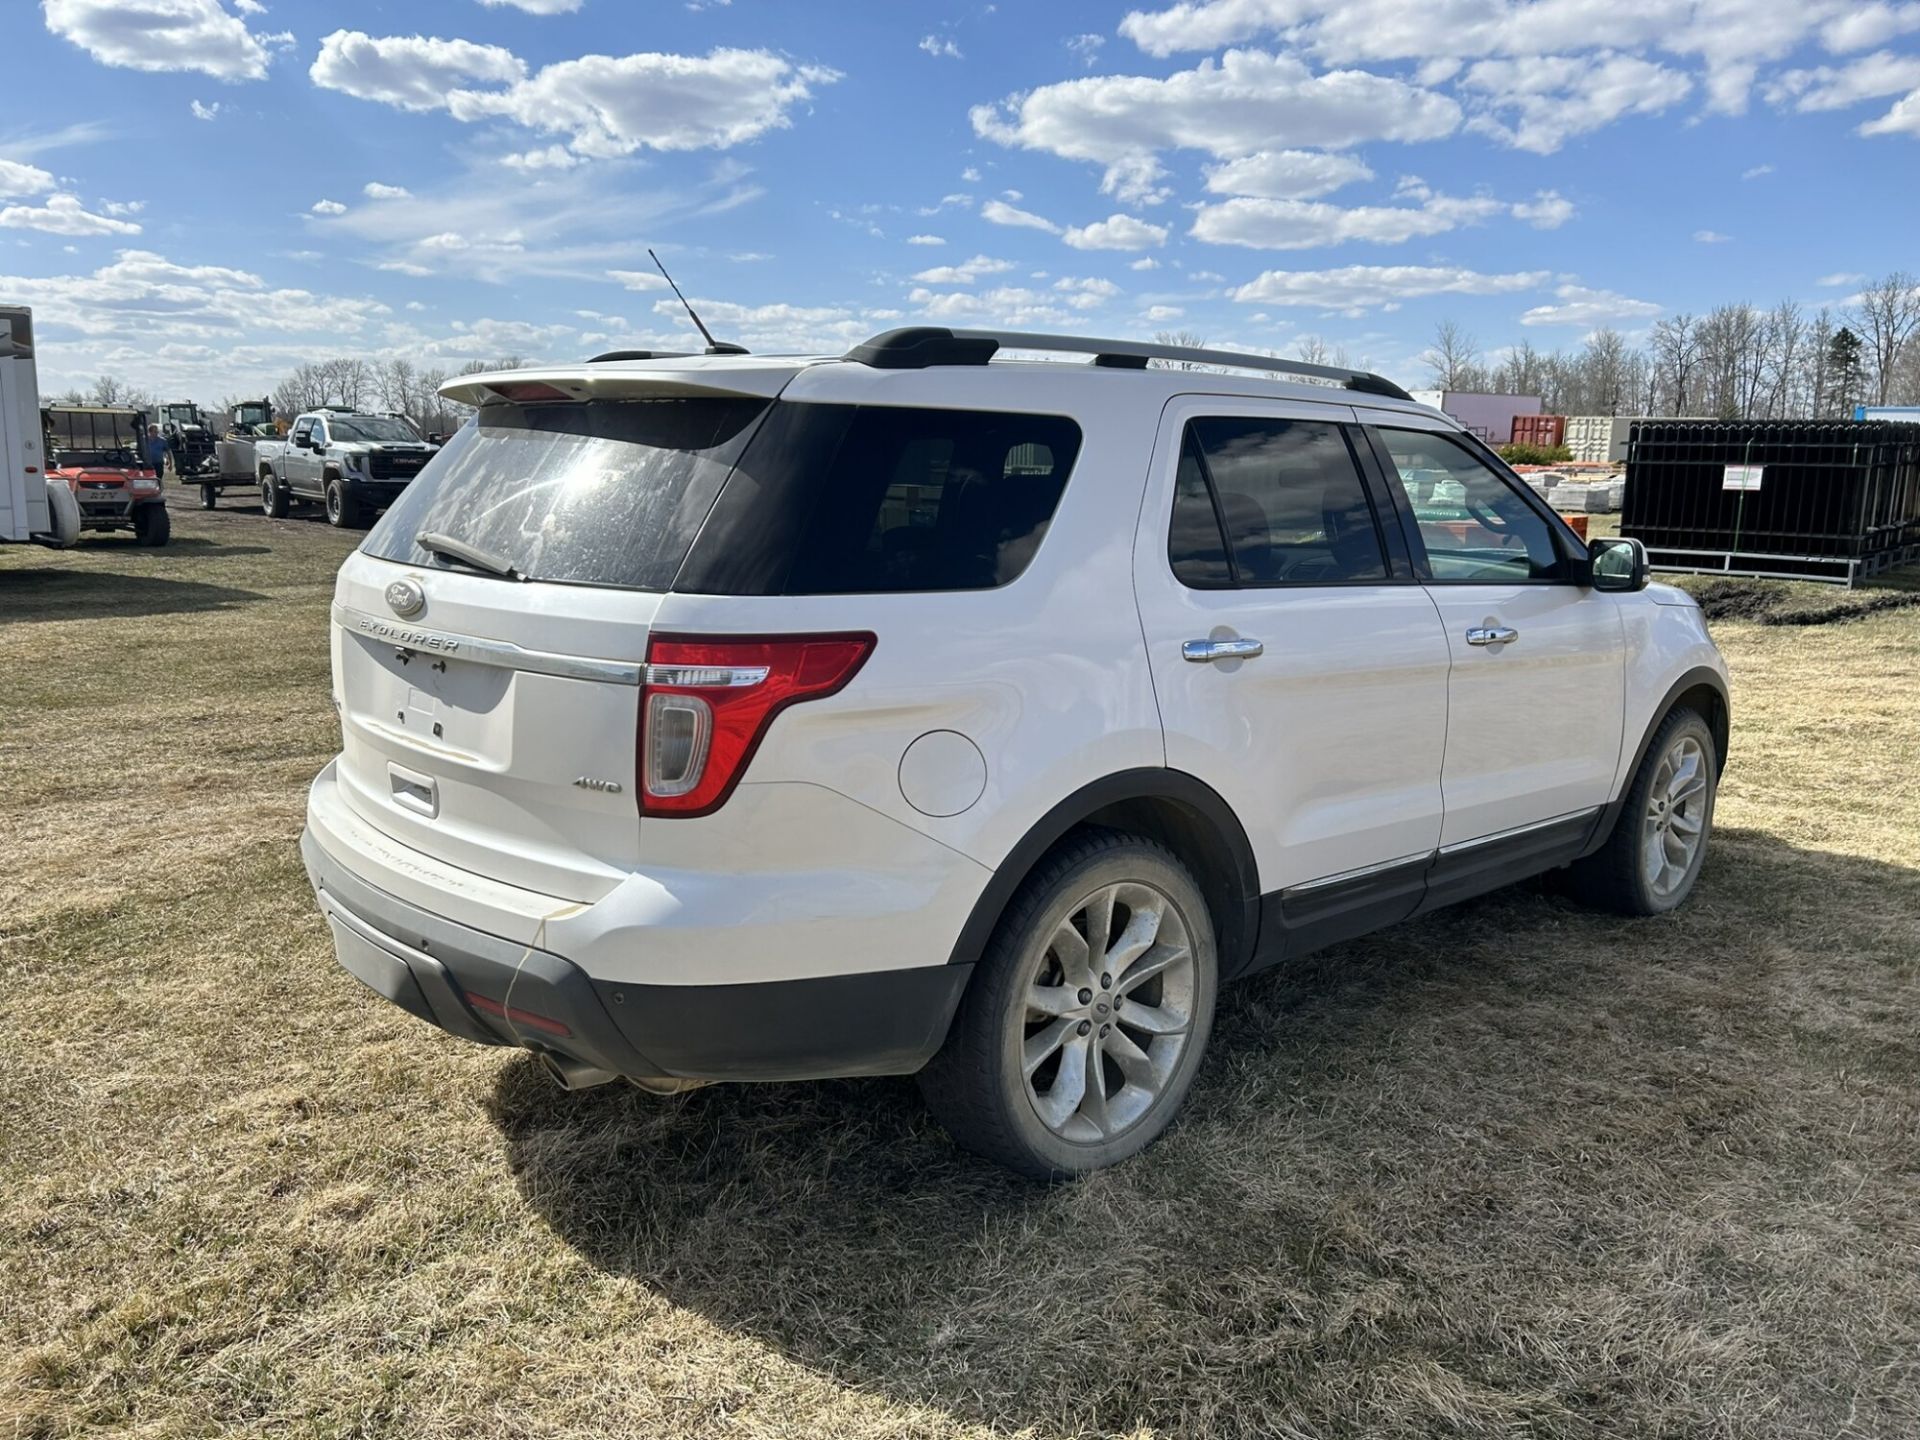 2011 FORD EXPLORER SUV LIMITED, FULL LOAD, AWD. 3.5L V6 - NOTE** TRANS NEEDS REPAIR OR REPLACEMENT - Image 3 of 15